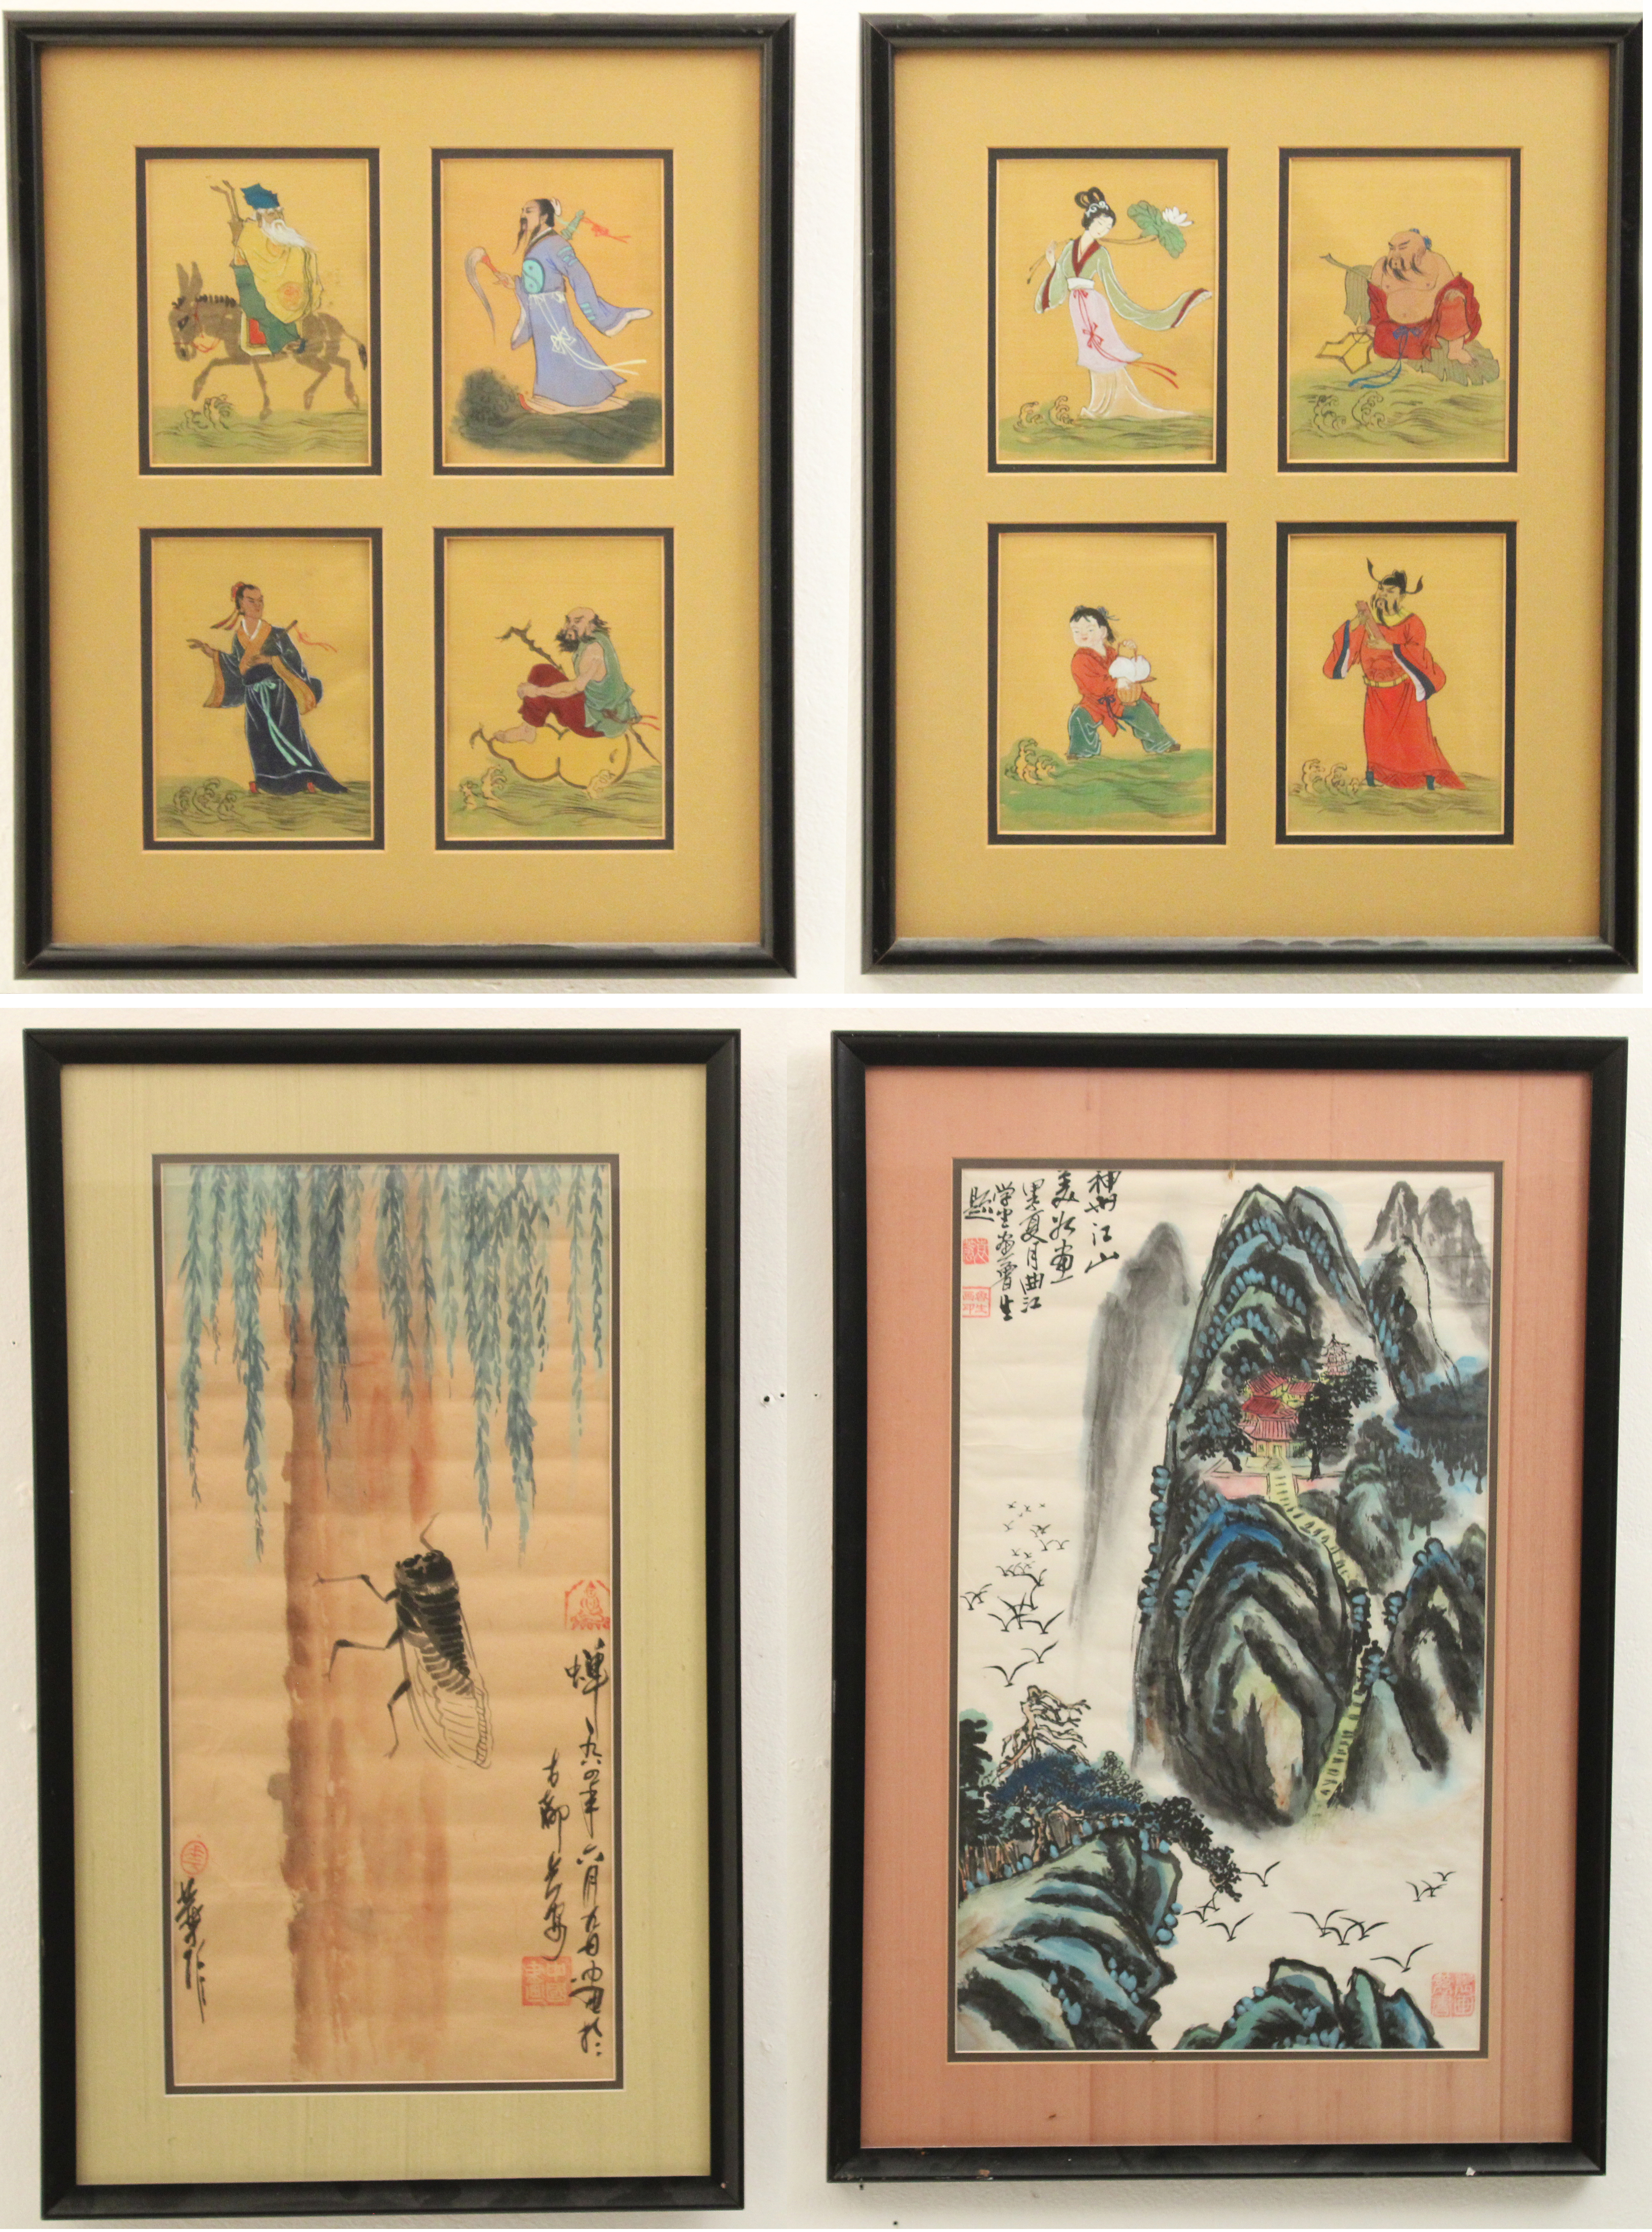 GROUP OF 4 JAPANESE WATERCOLORS